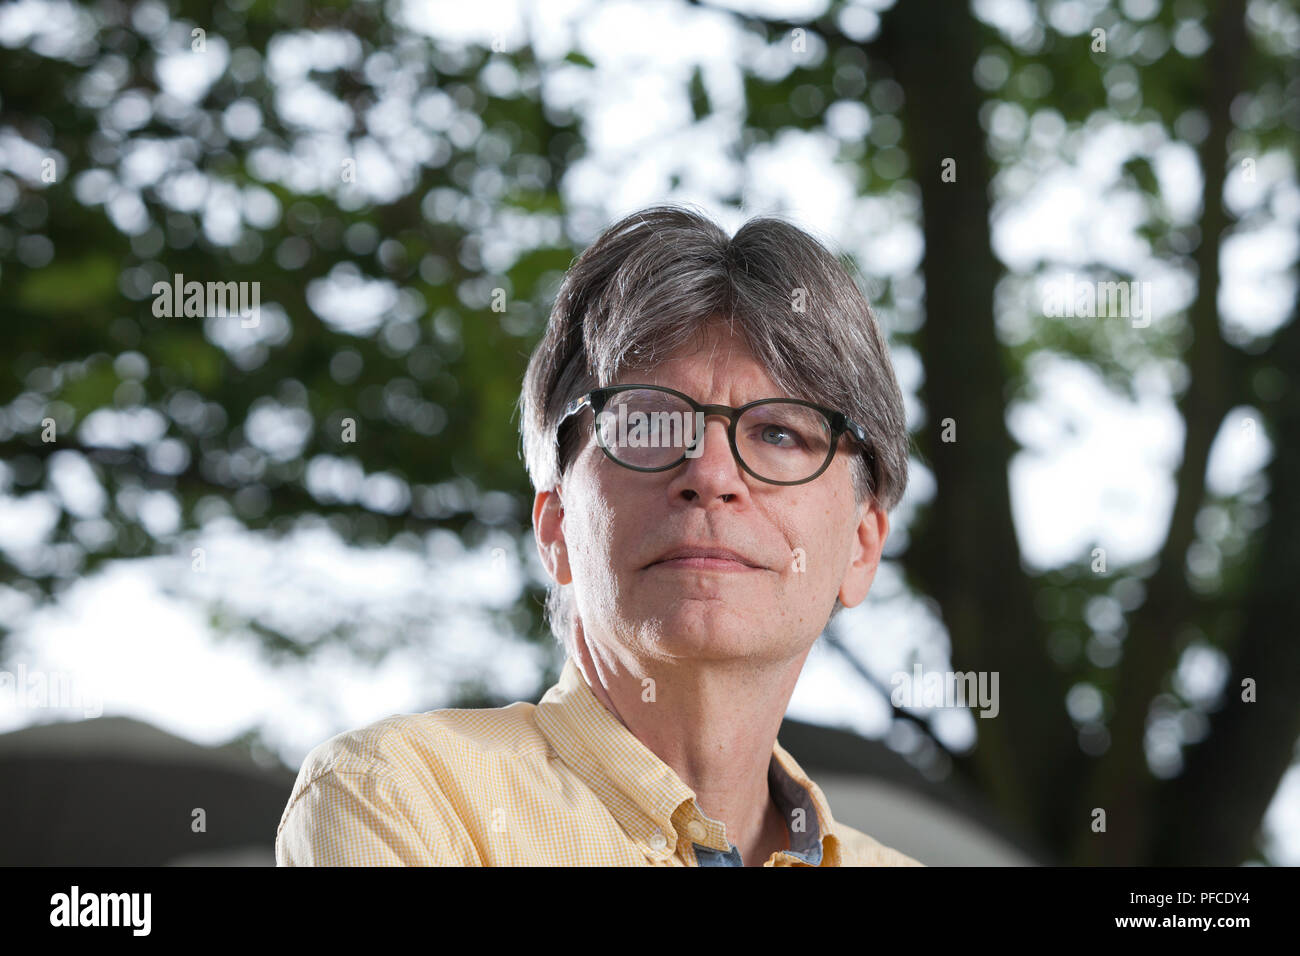 Edinburgh, UK. 21st August, 2018. Richard Powers is an American novelist whose works explore the effects of modern science and technology. Pictured at the Edinburgh International Book Festival. Edinburgh, Scotland.  Picture by Gary Doak / Alamy Live News Stock Photo